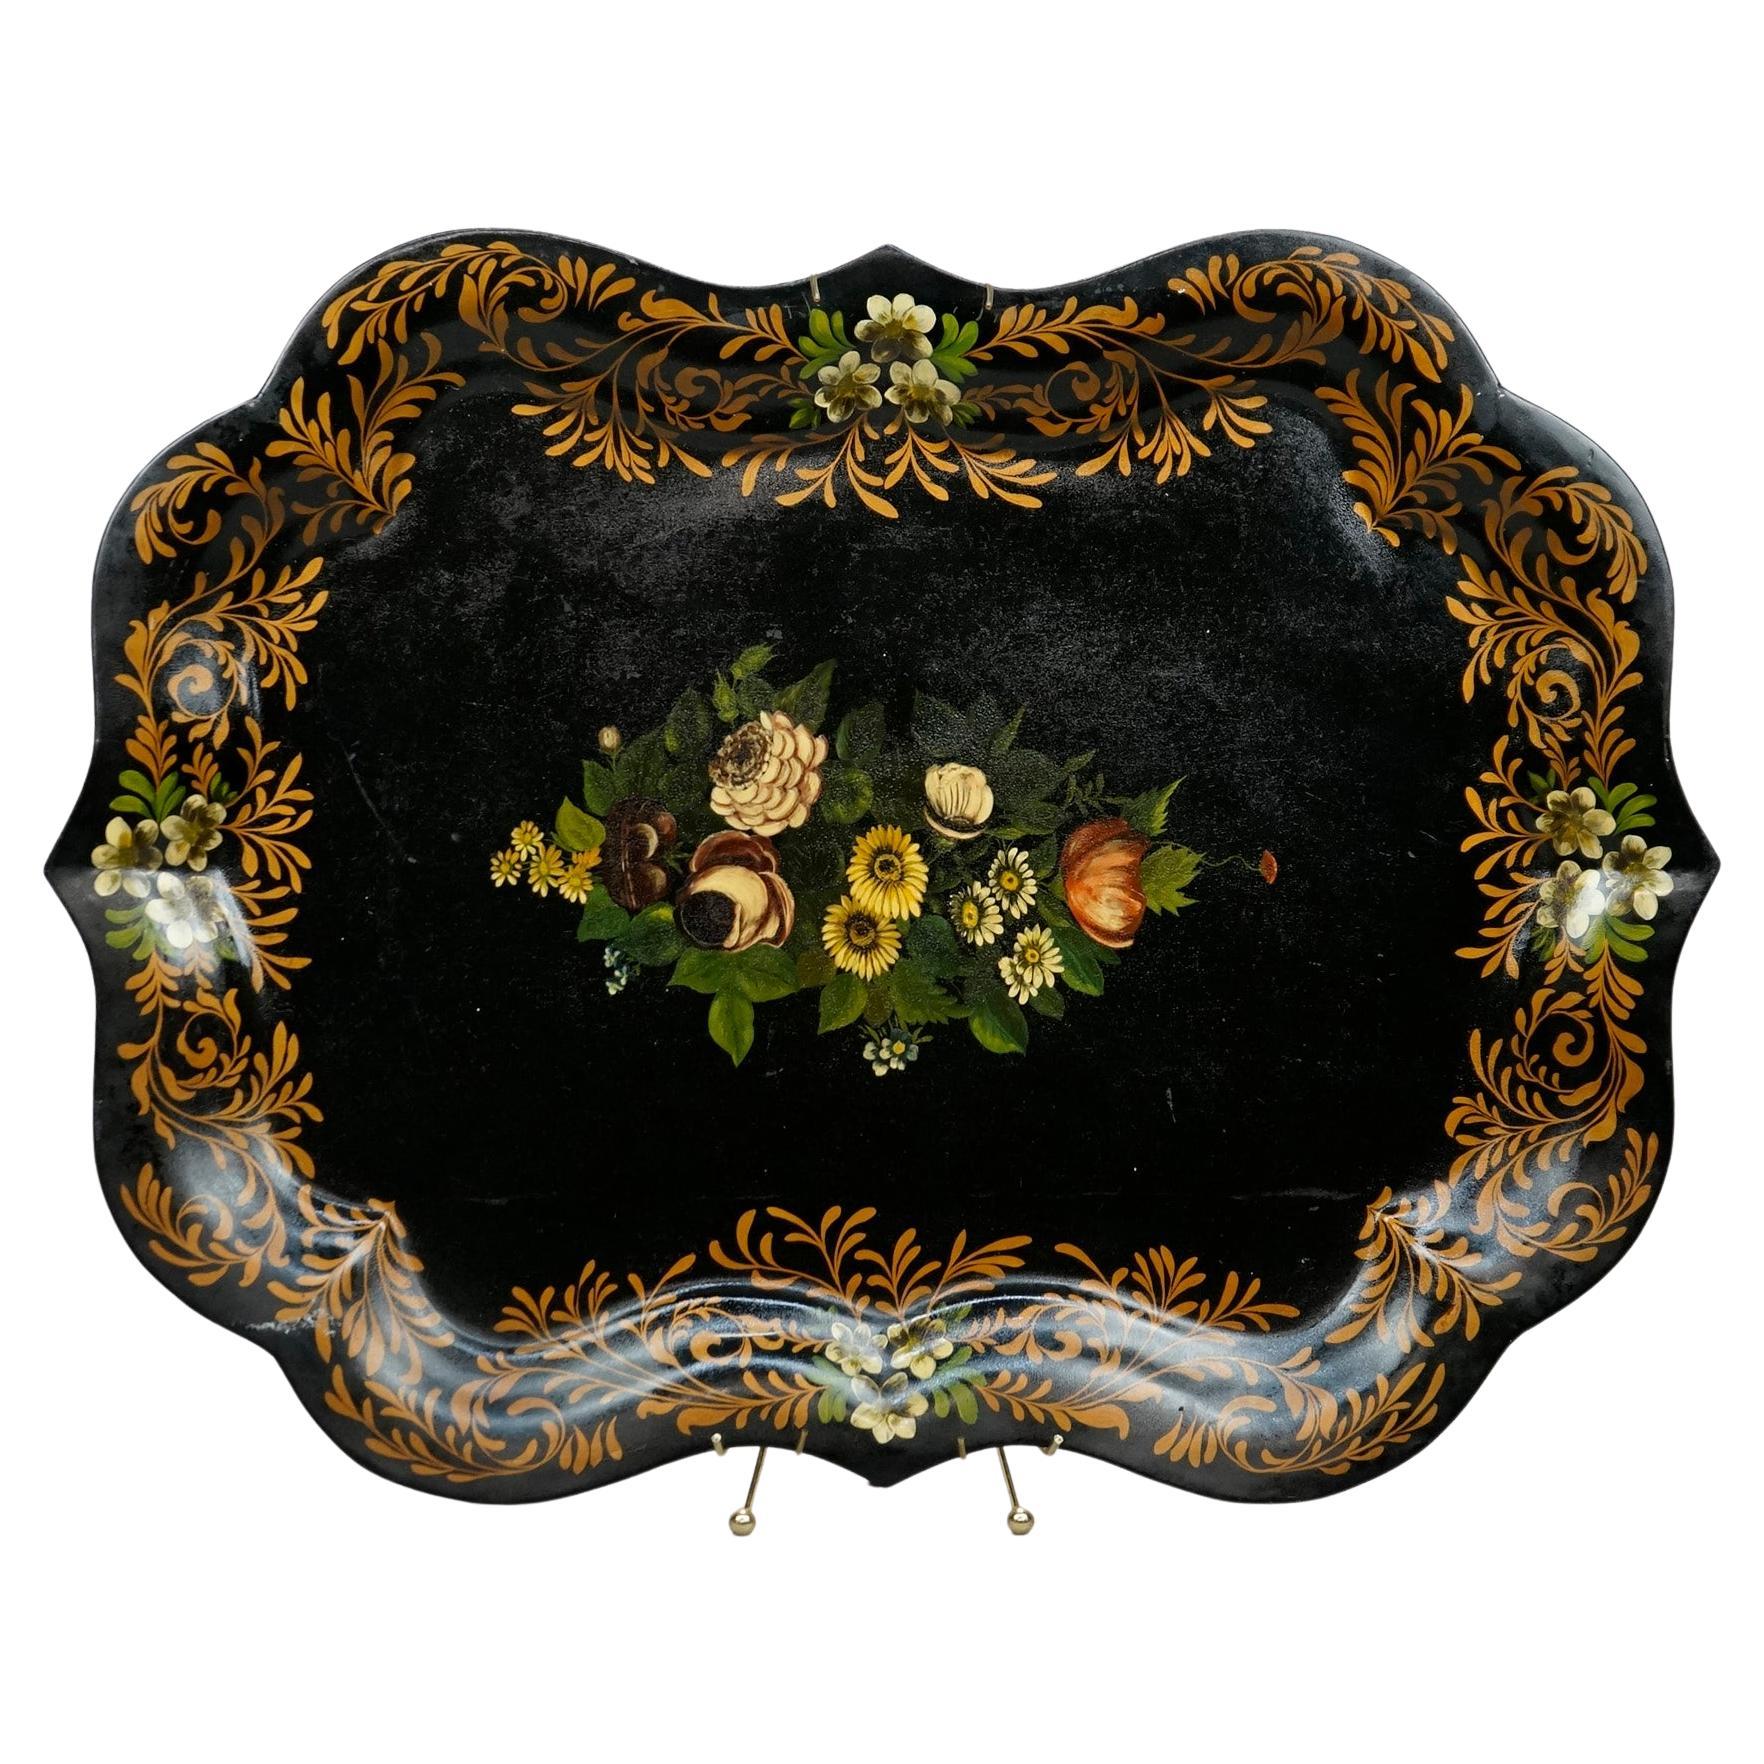 Antique Oversized Floral Painted Toleware Serving Tray 19th C